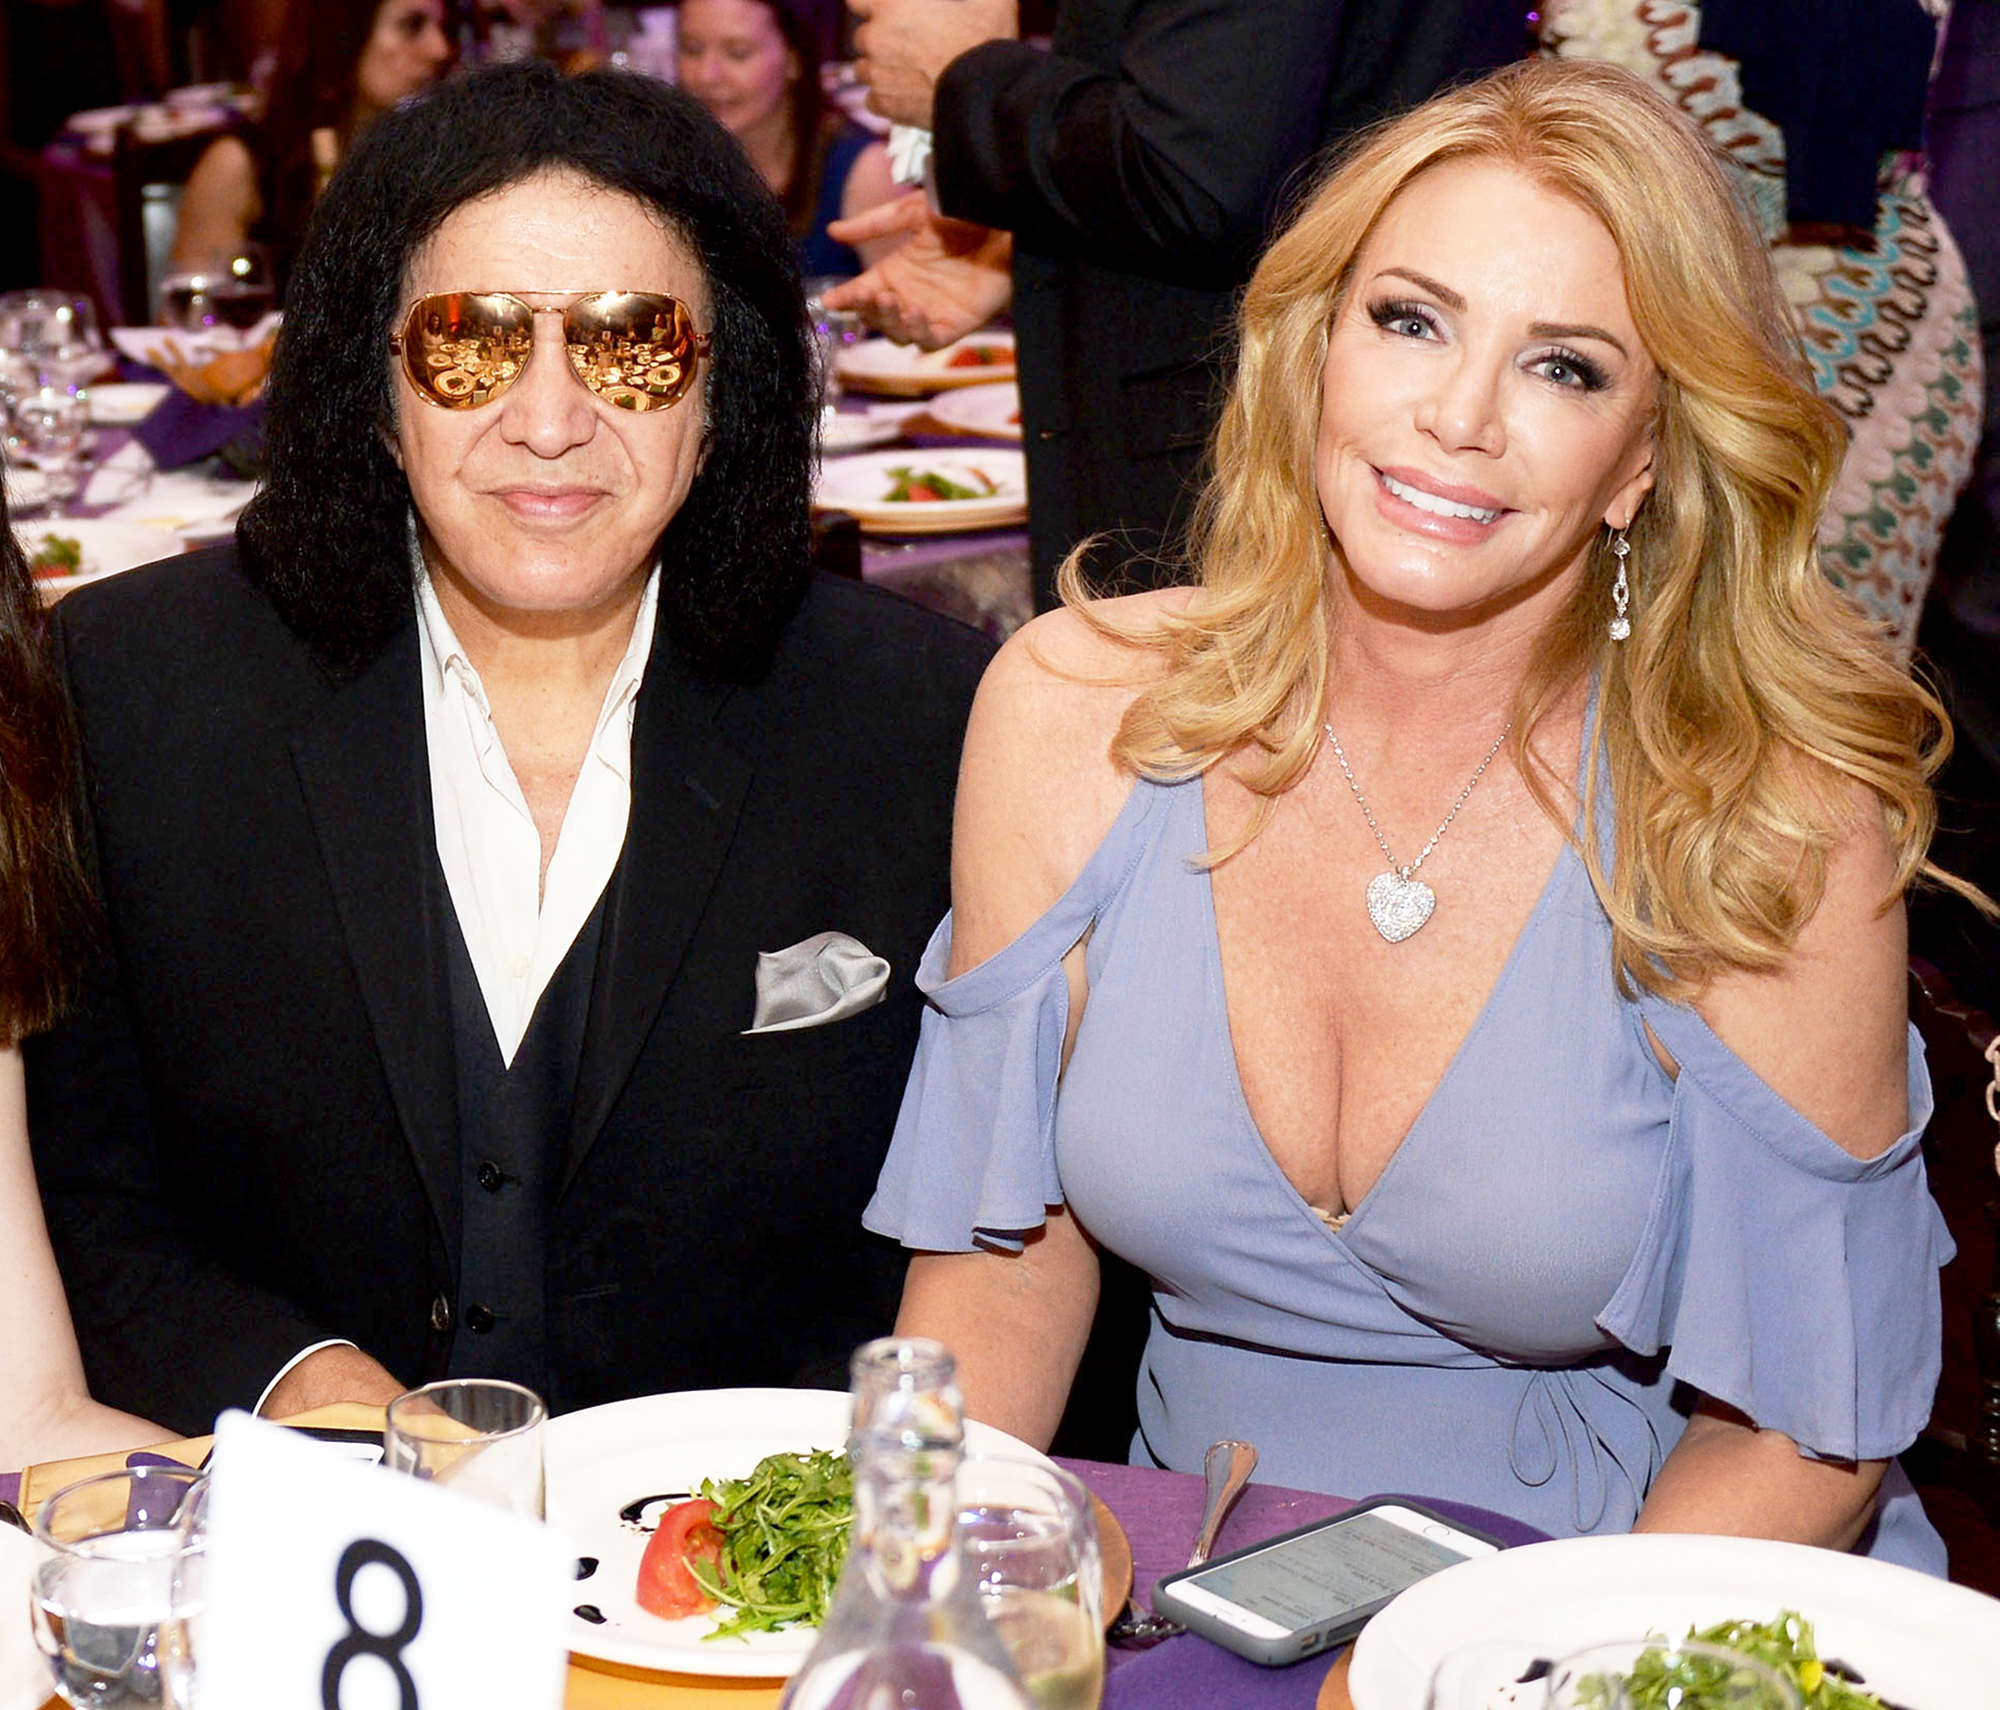 Gene Simmons Says He Made Mistakes, Wife Shannon Tweed Forgave His Trespasses